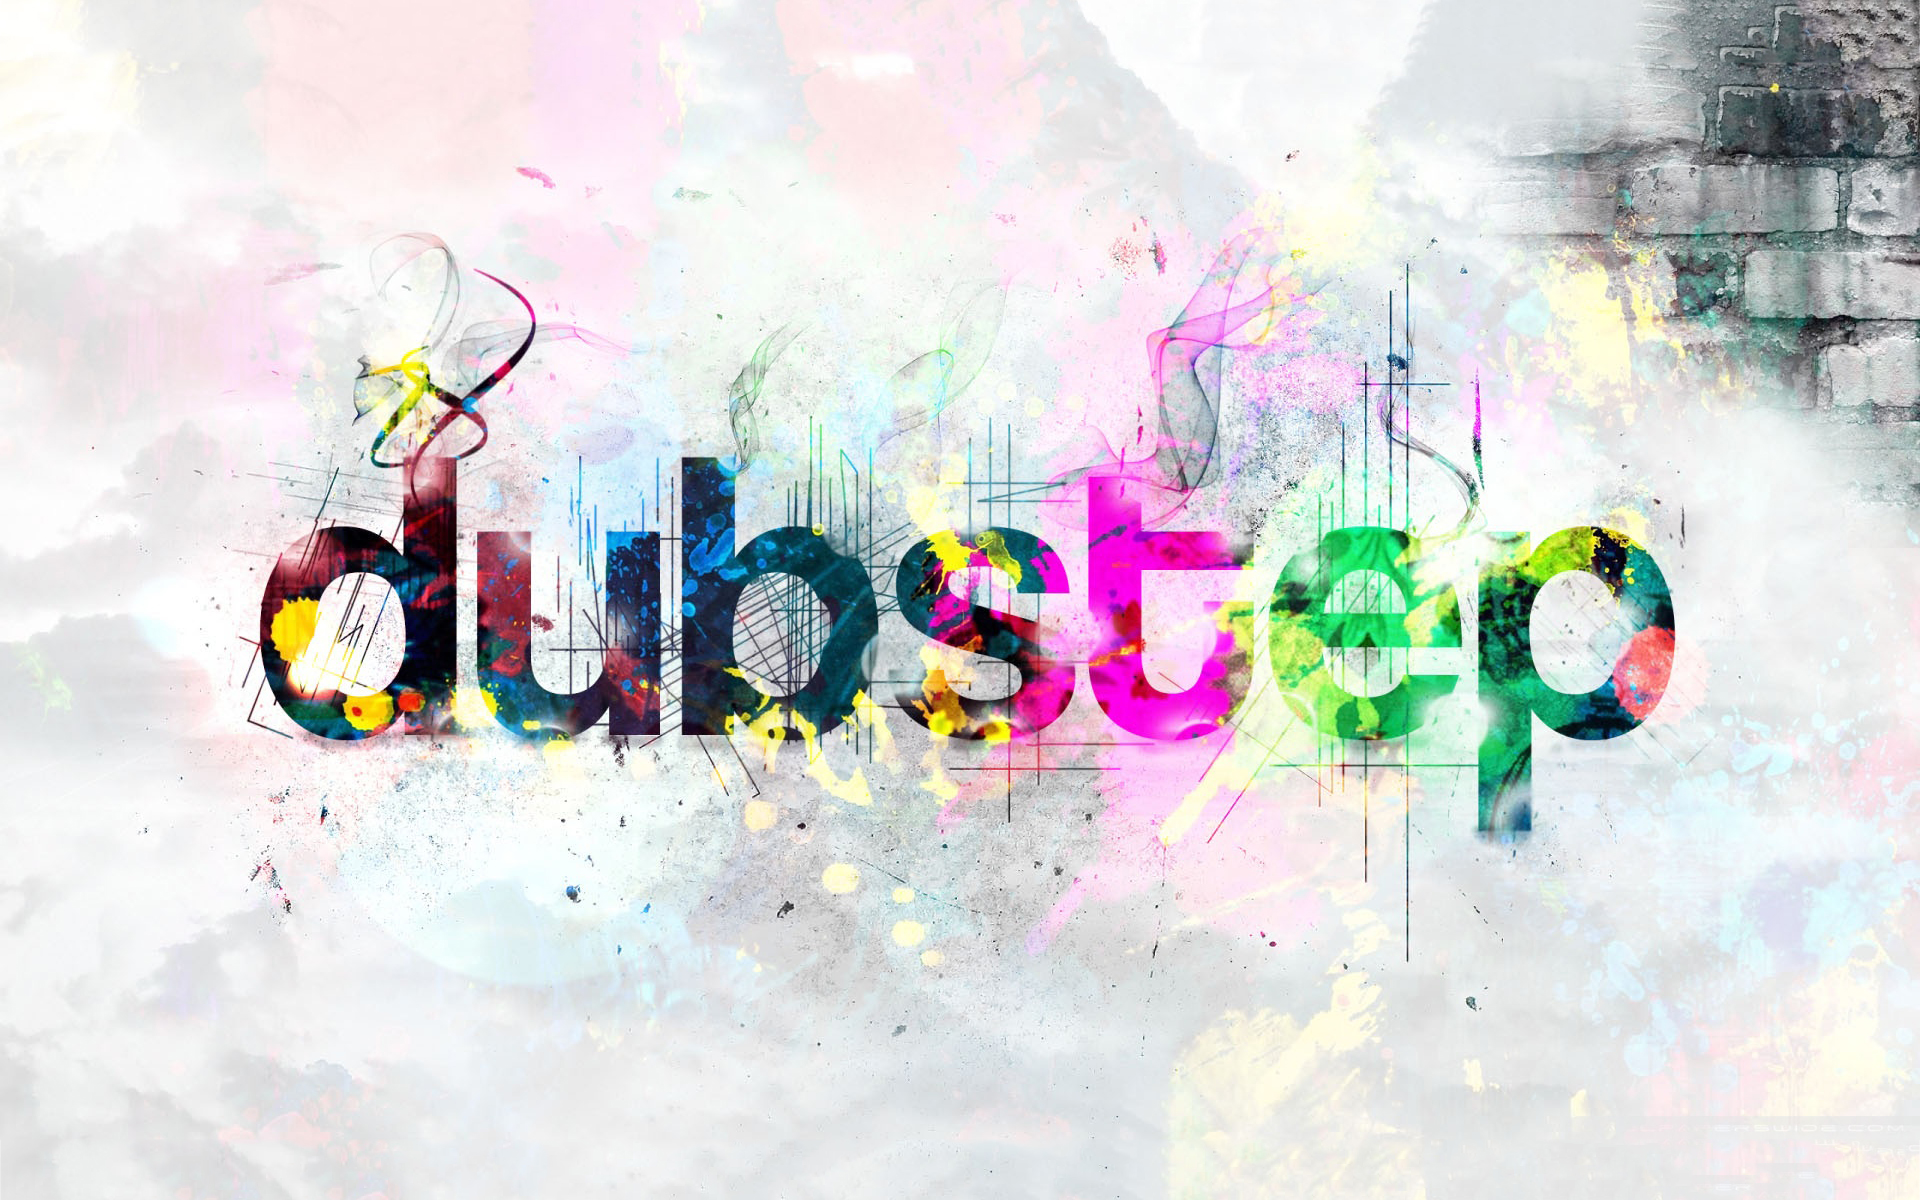 Related For Dubstep Backgrounds. Dubstep